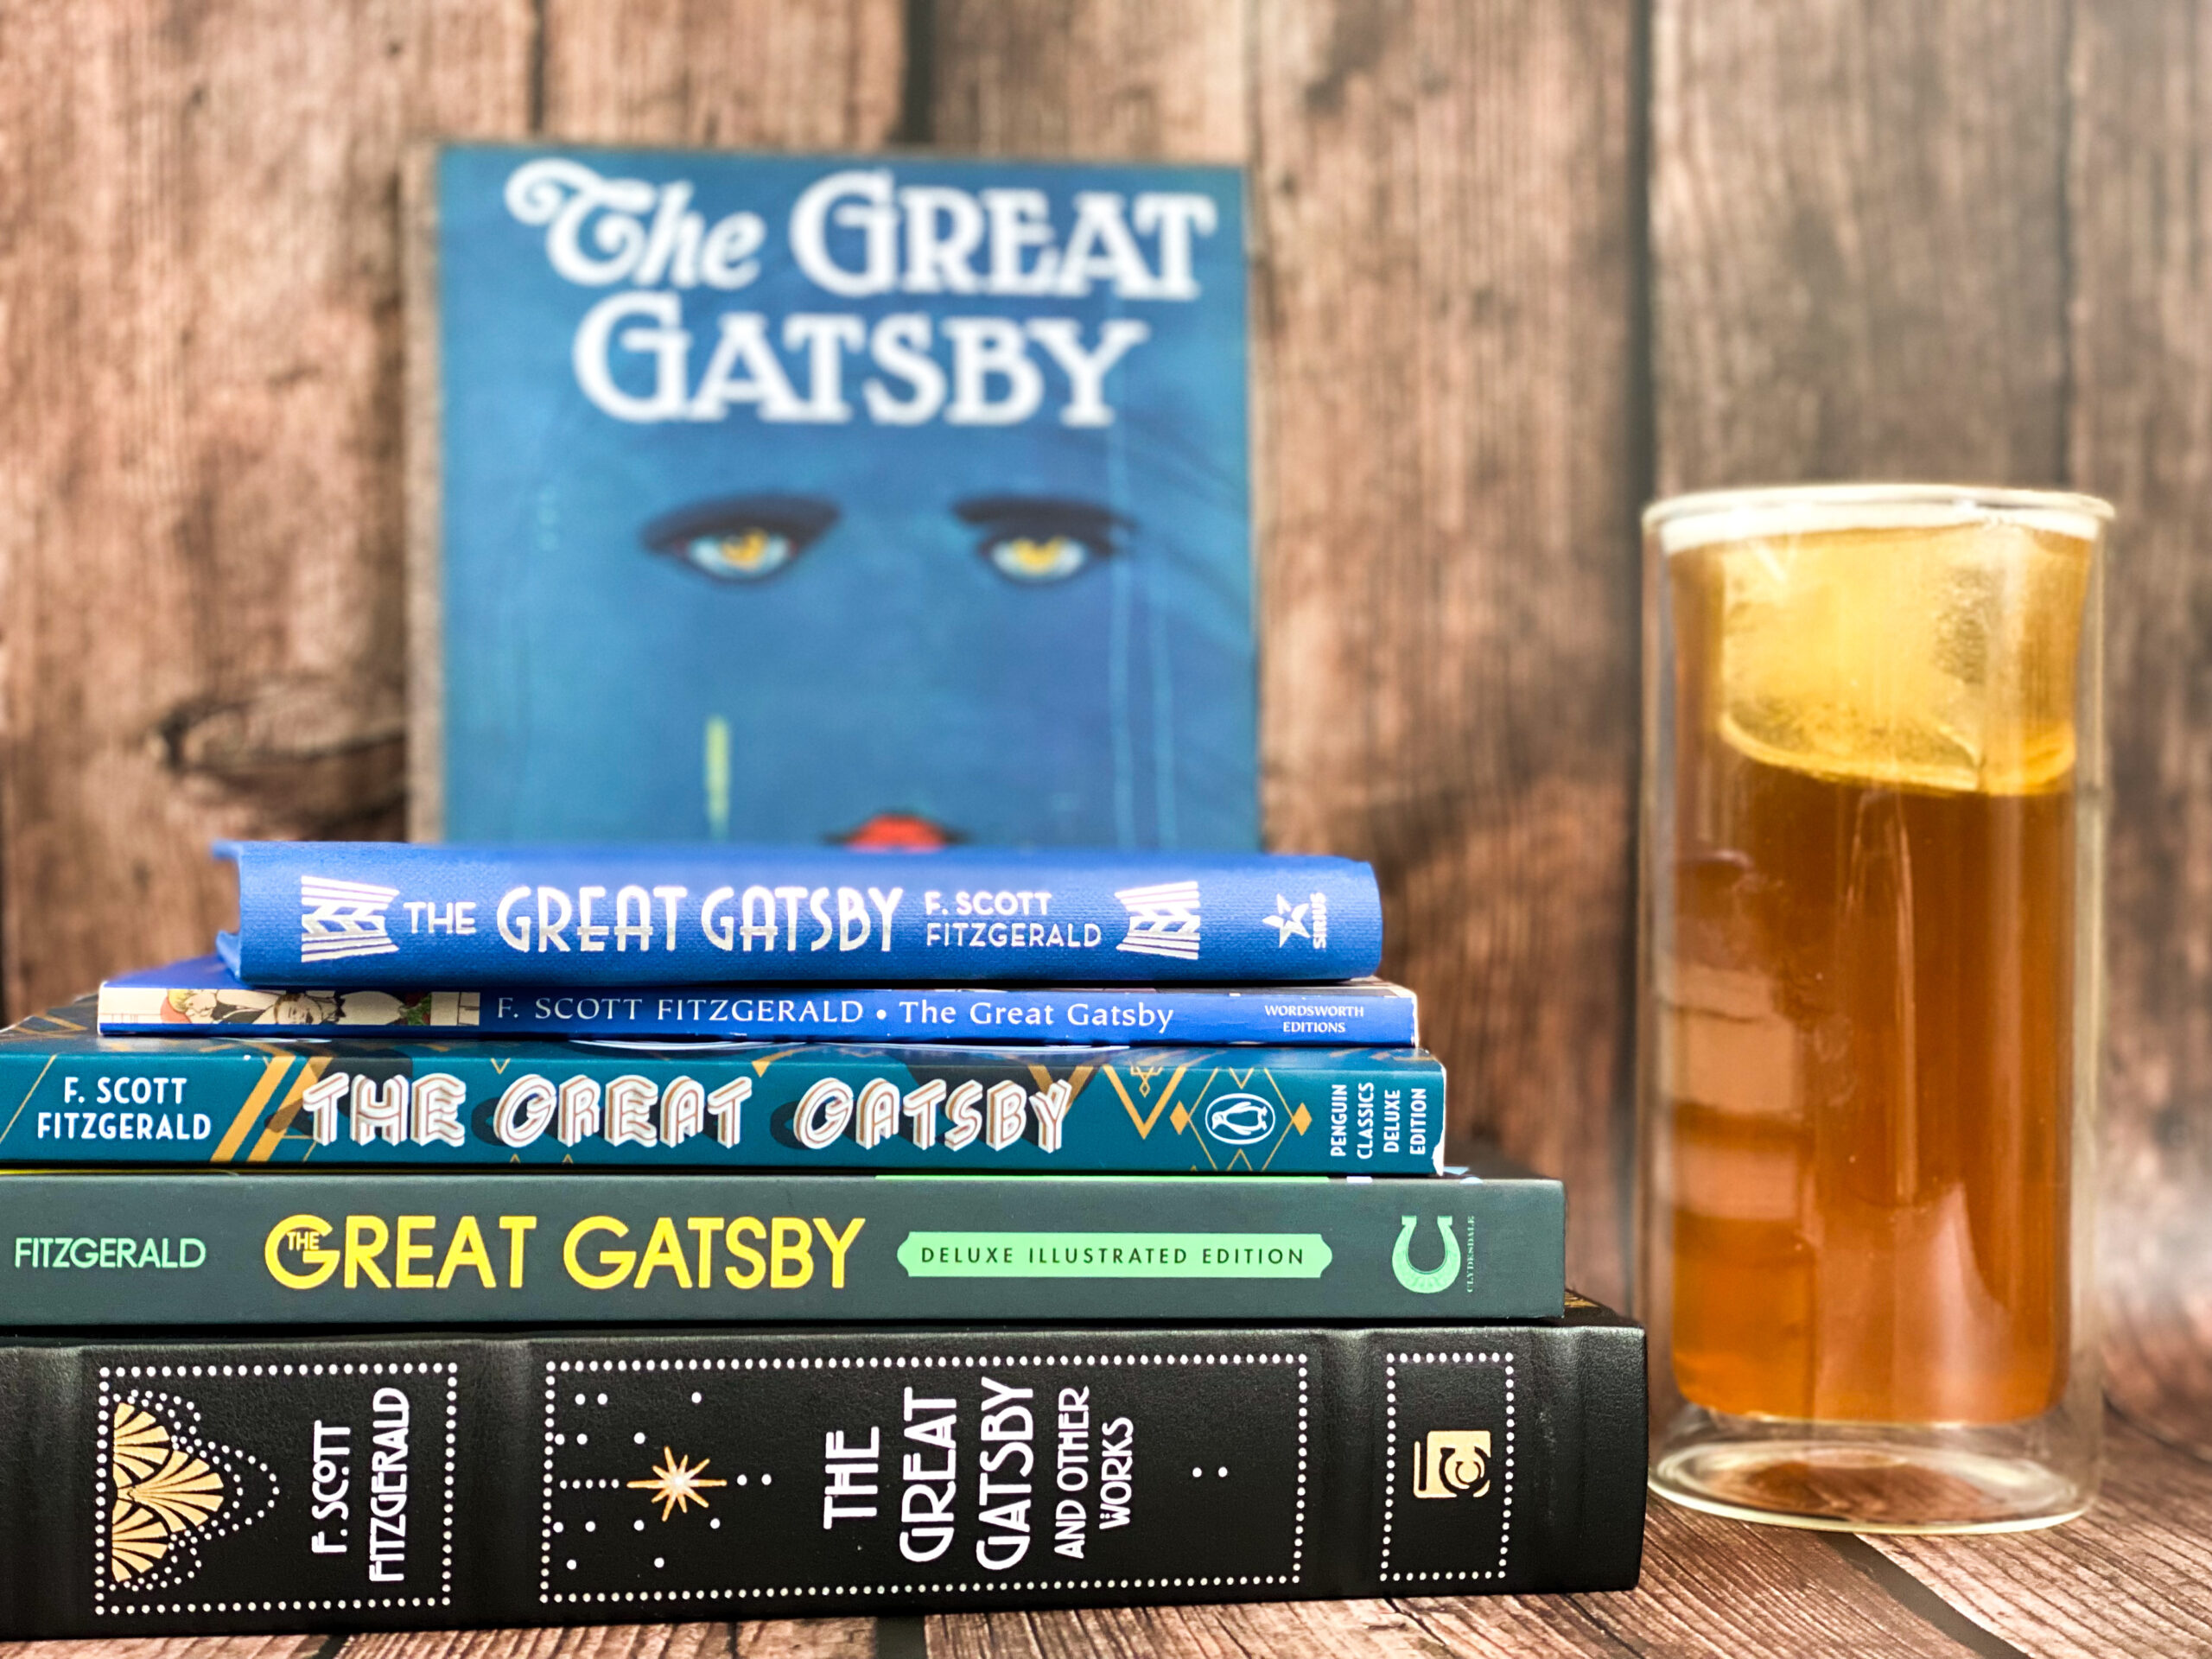 5 Book and Beverage Pairings to Enjoy This Summer